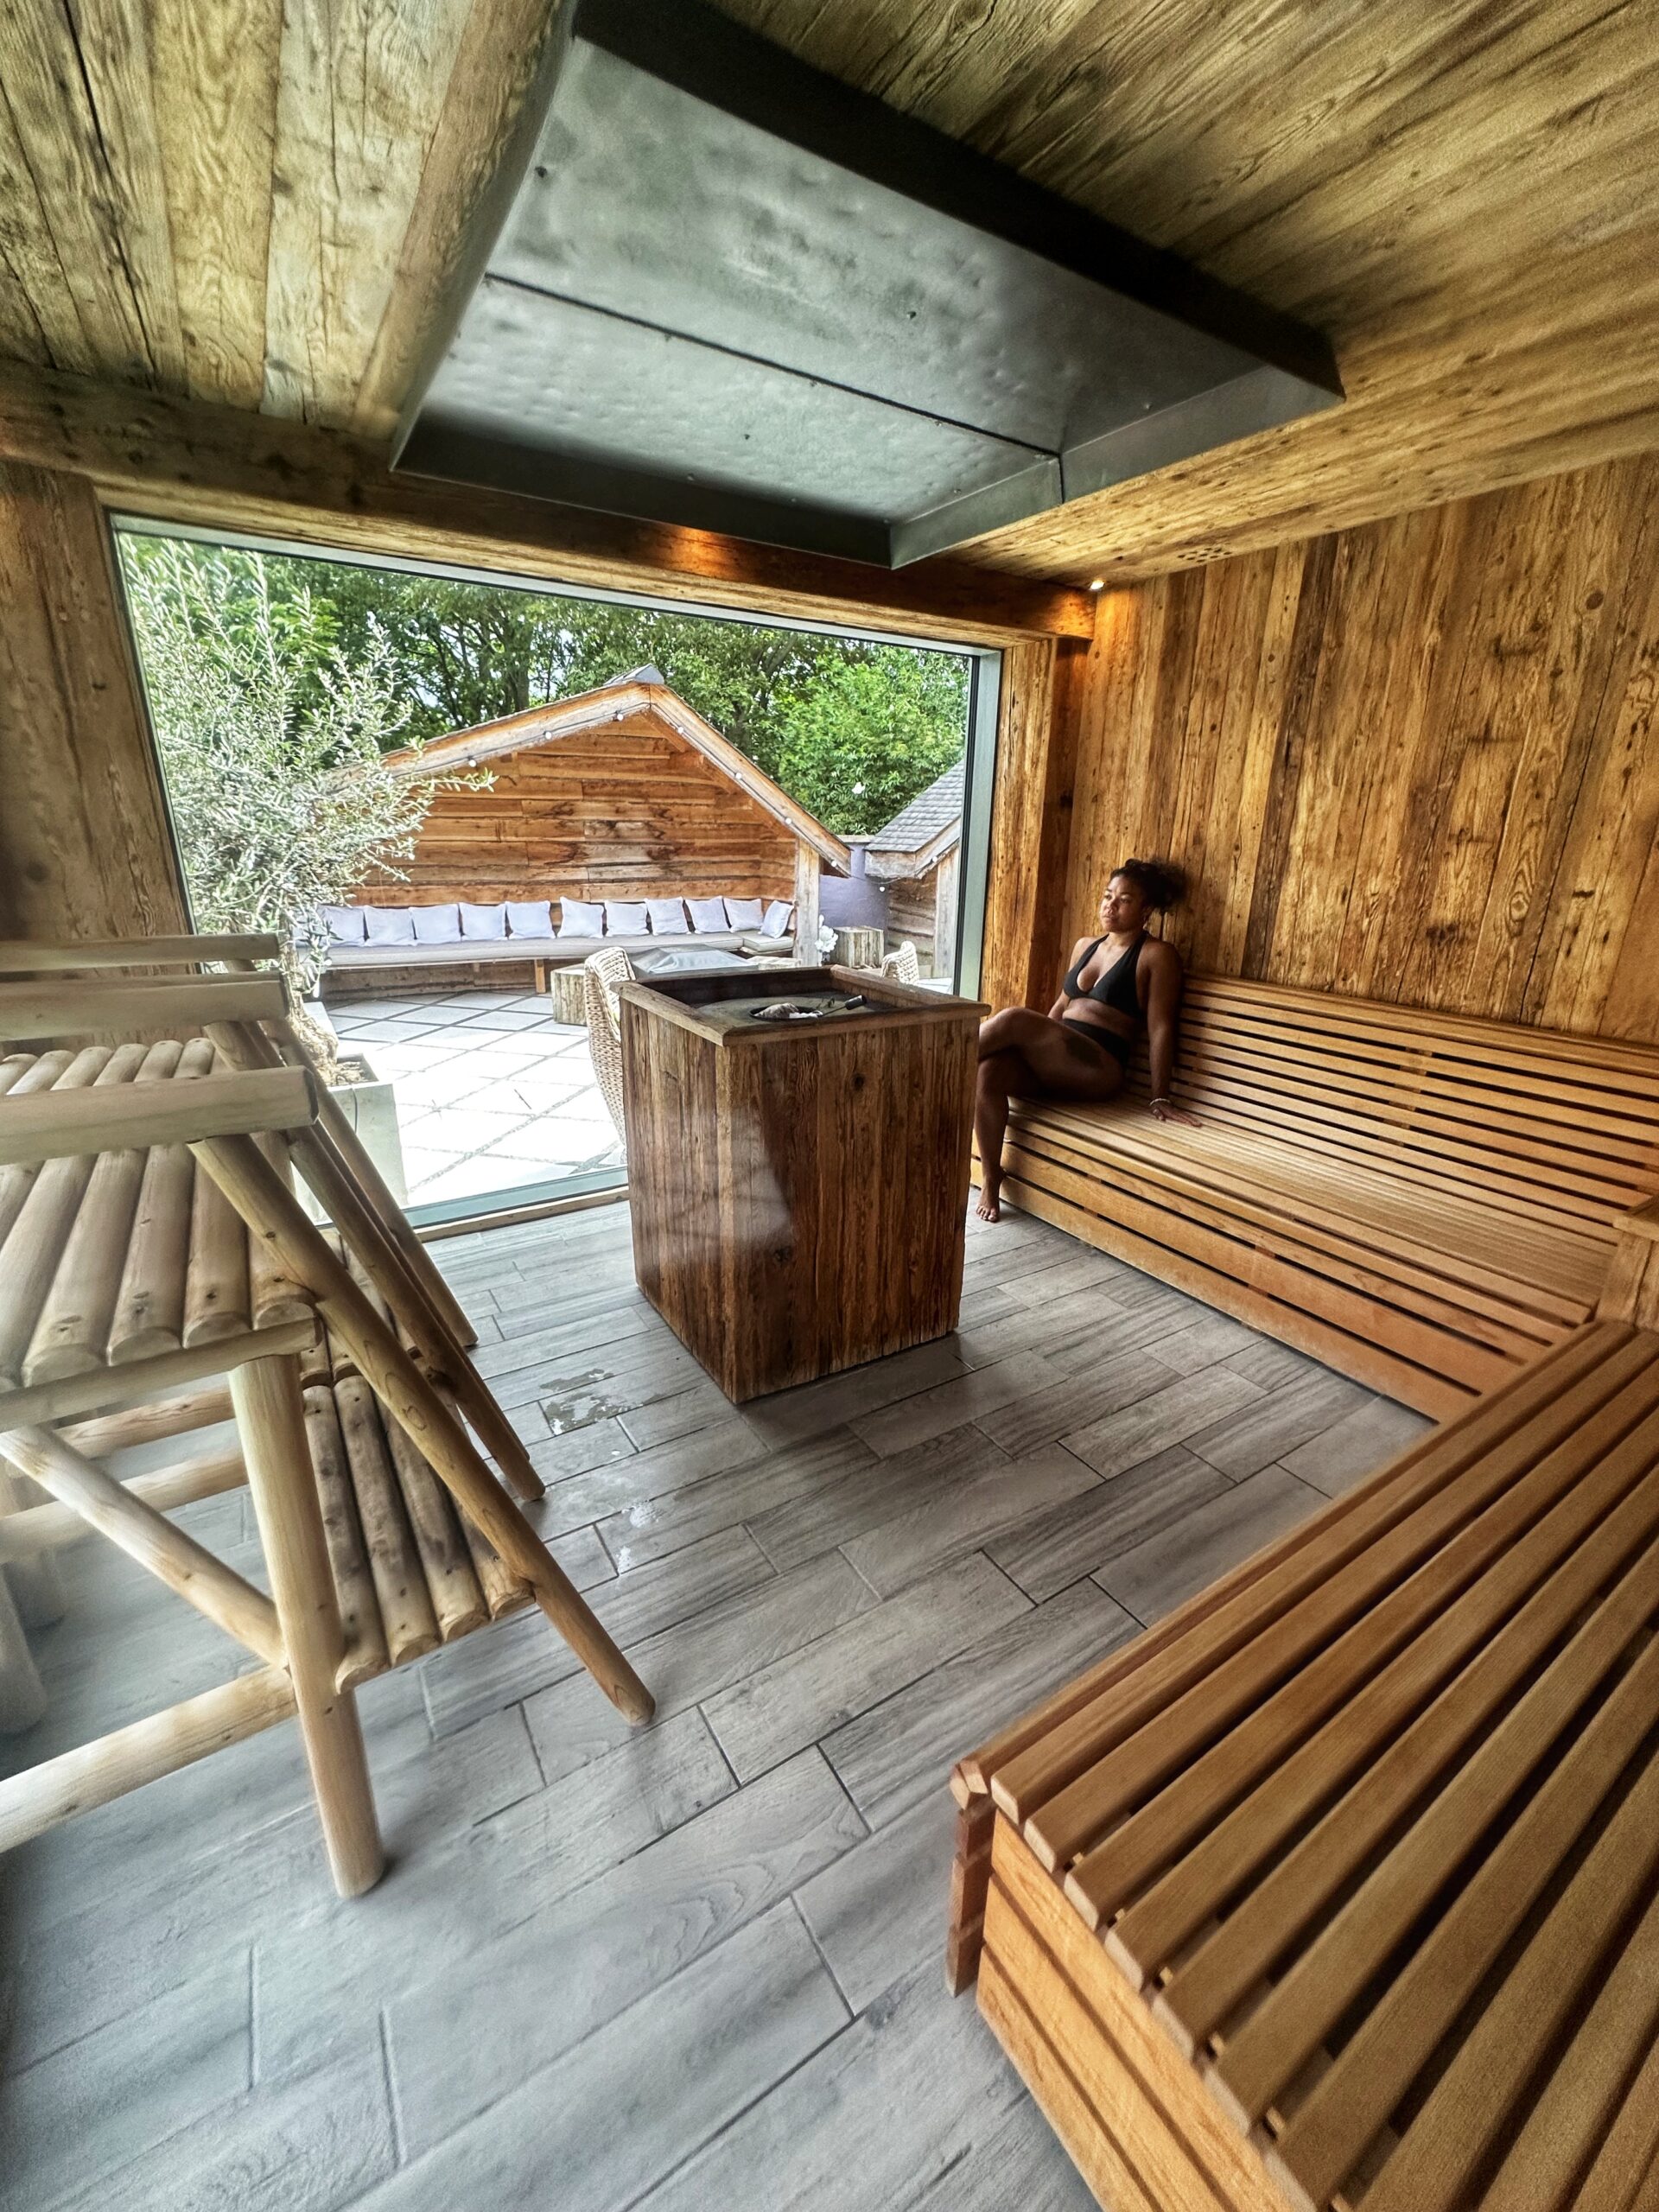 The sauna at Ye Olde Bell spa hotel